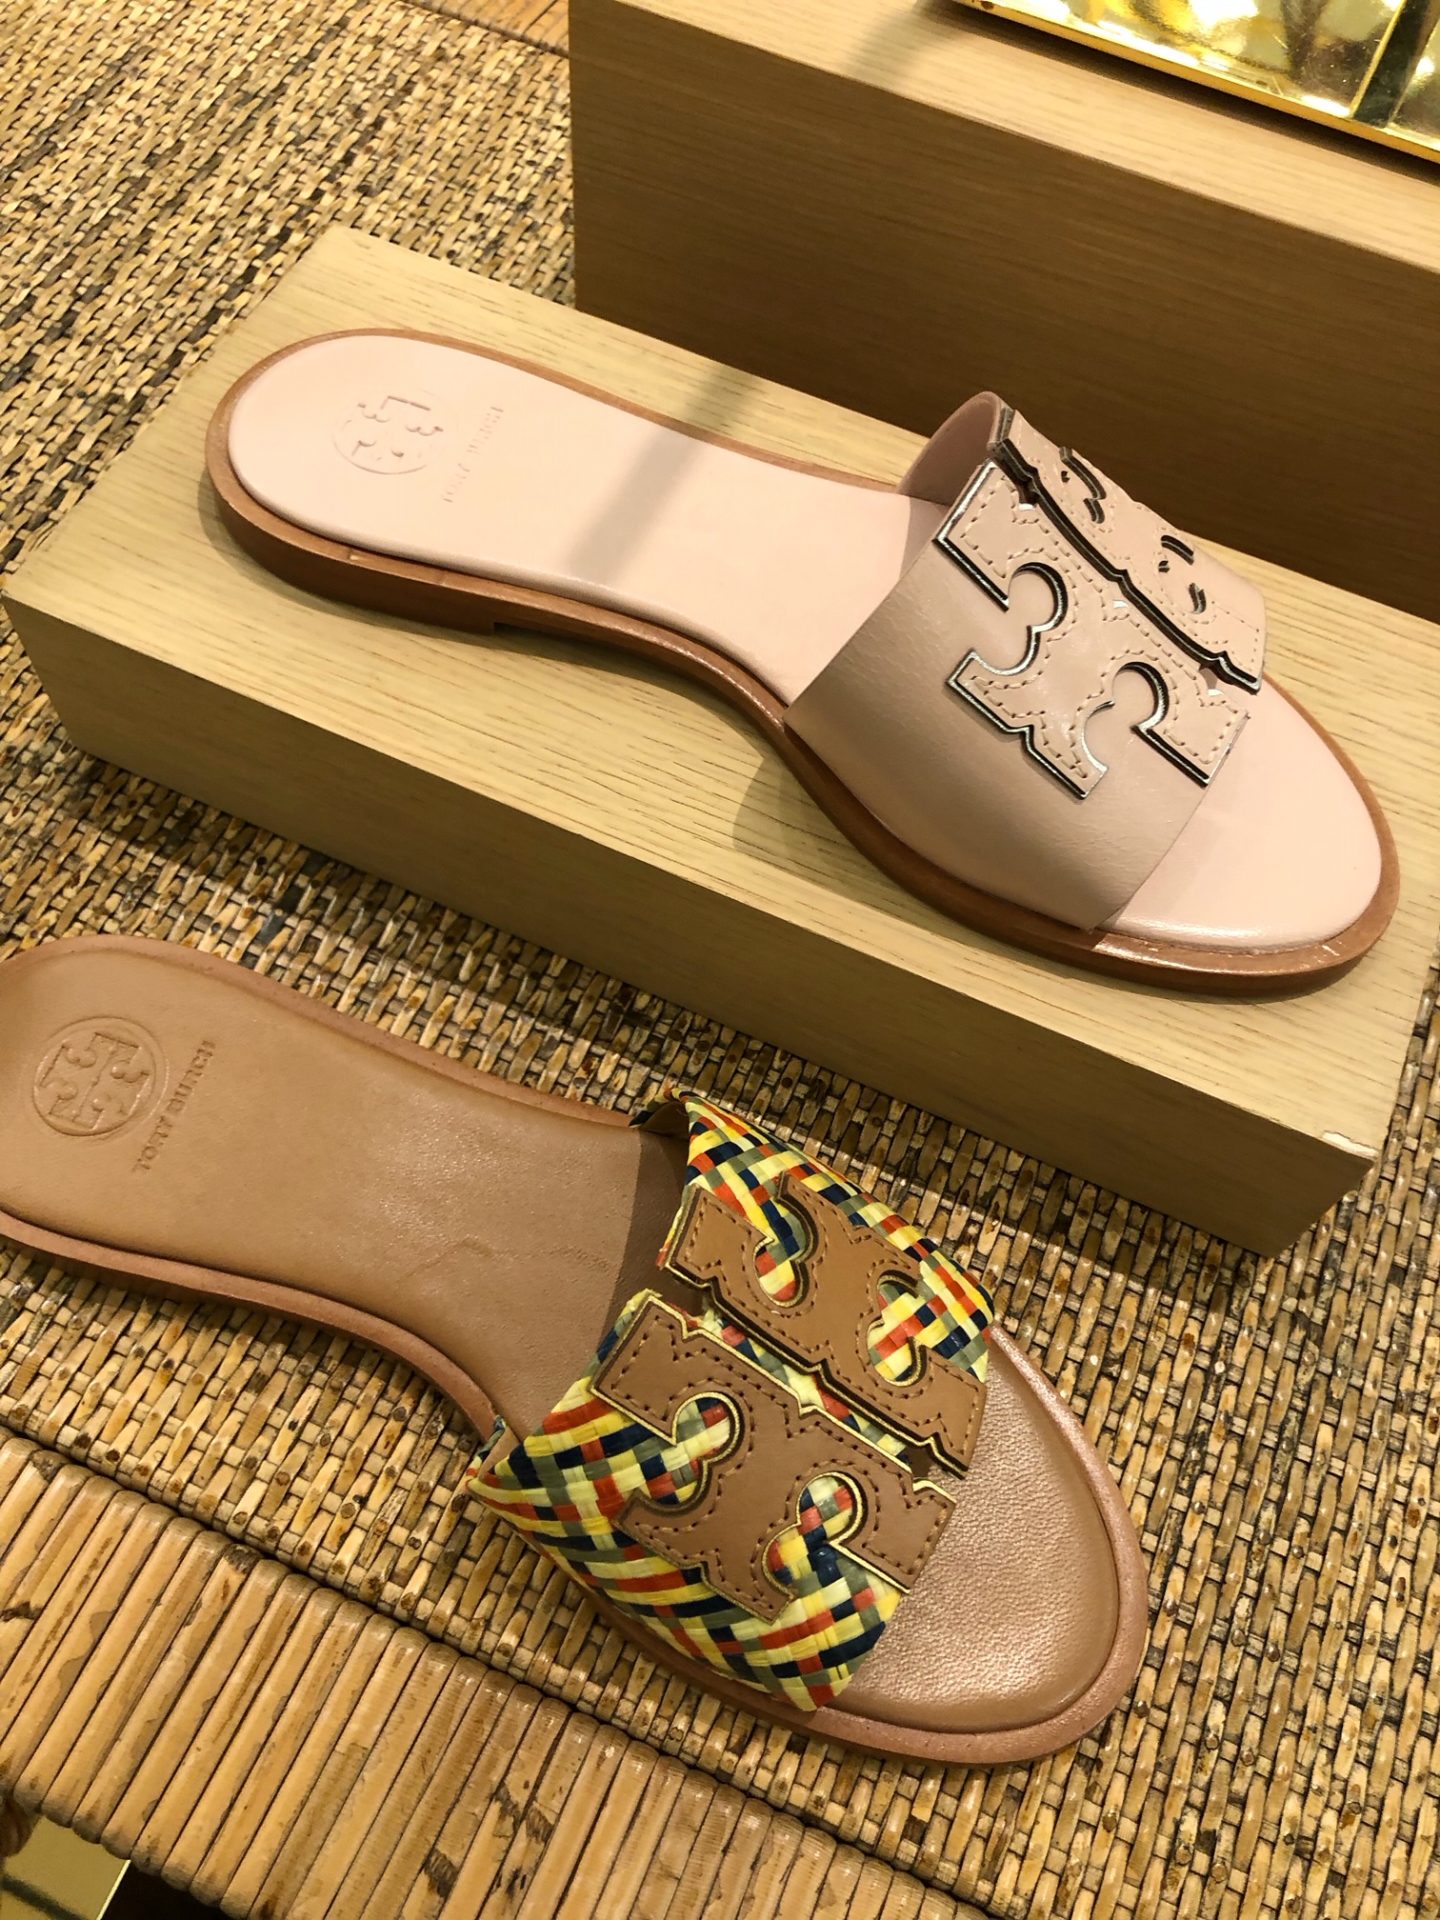 Tory Burch Spring Event 2019 | Save Up To 30% Off! - The Double Take Girls